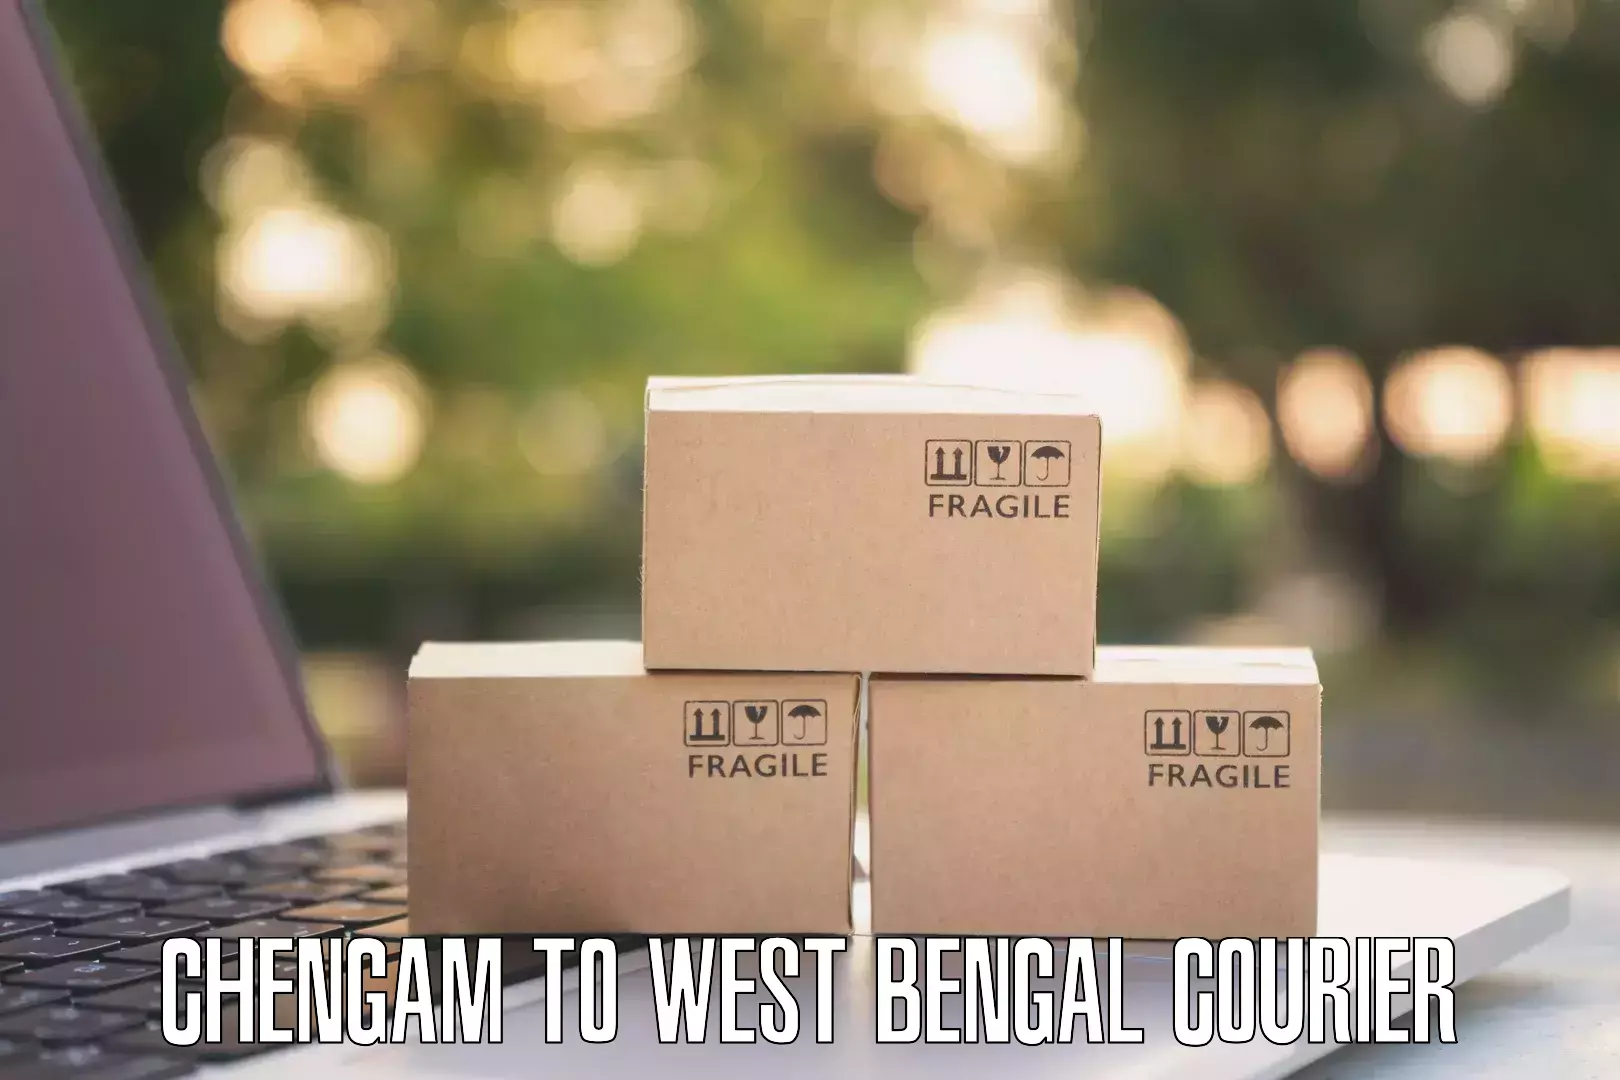 User-friendly courier app Chengam to Basirhat